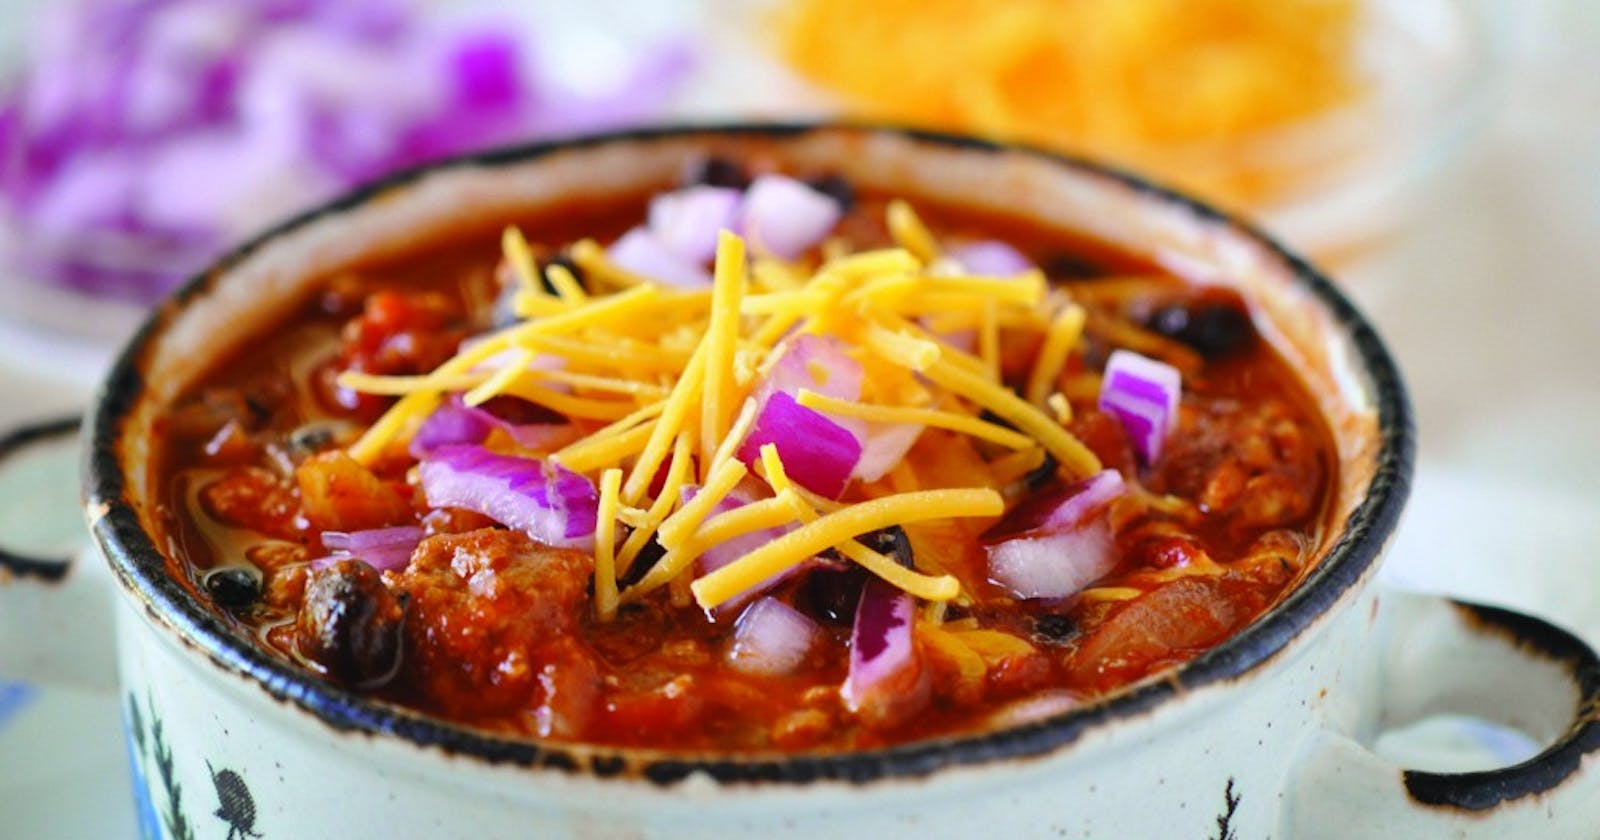 Quick Chili Recipe: 10 Ingredients + 10 Minutes for BEST Beef Chili Recipe